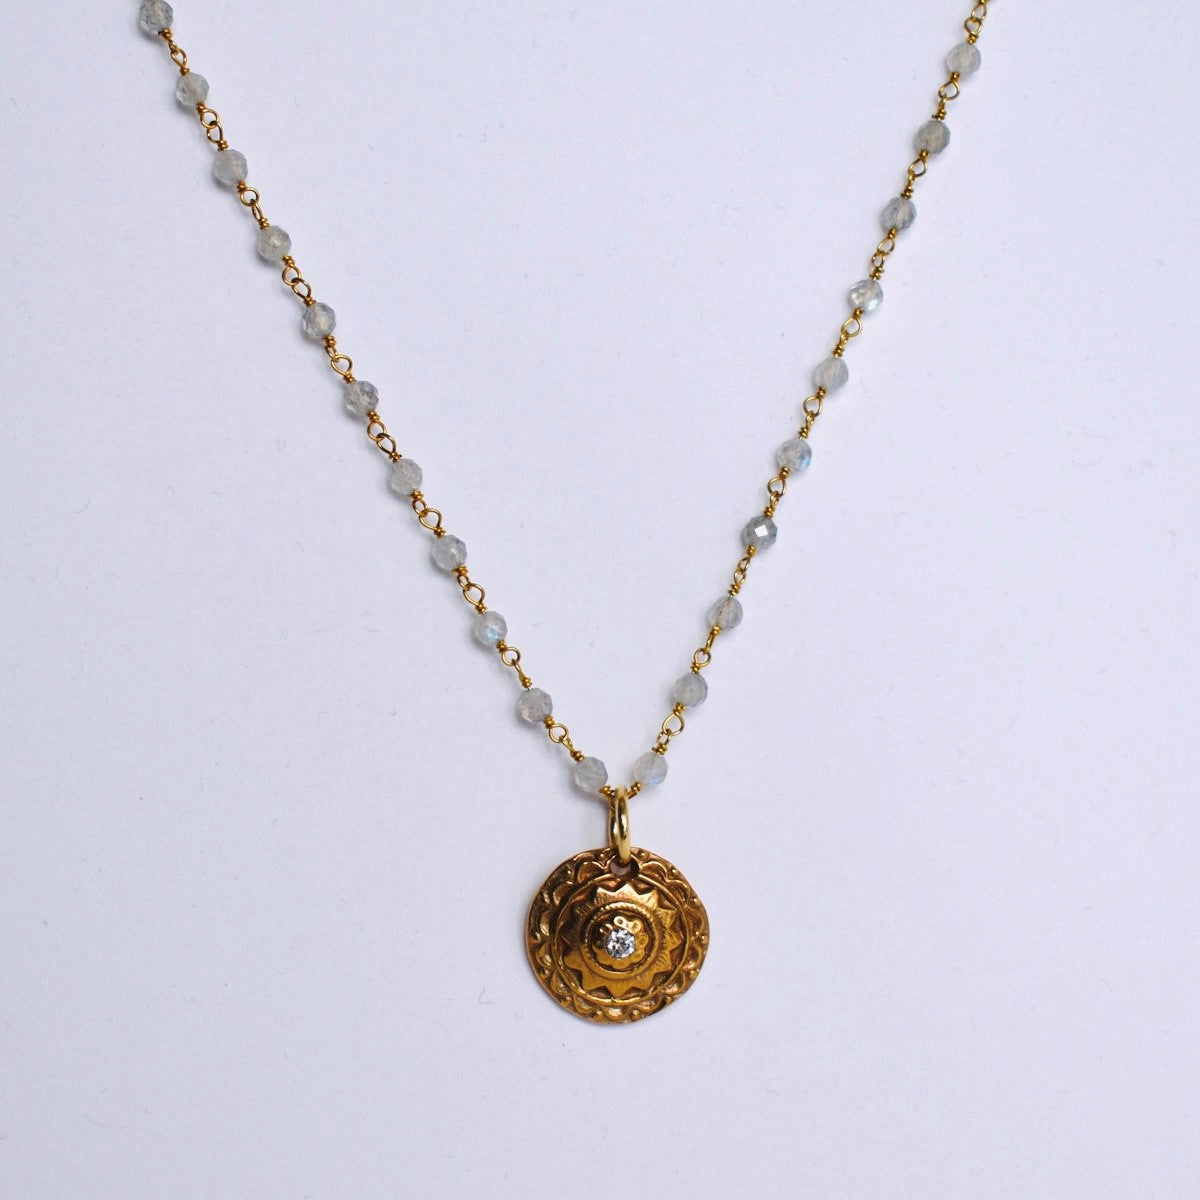 Handformed bronze pendant with CZ and handmade chain